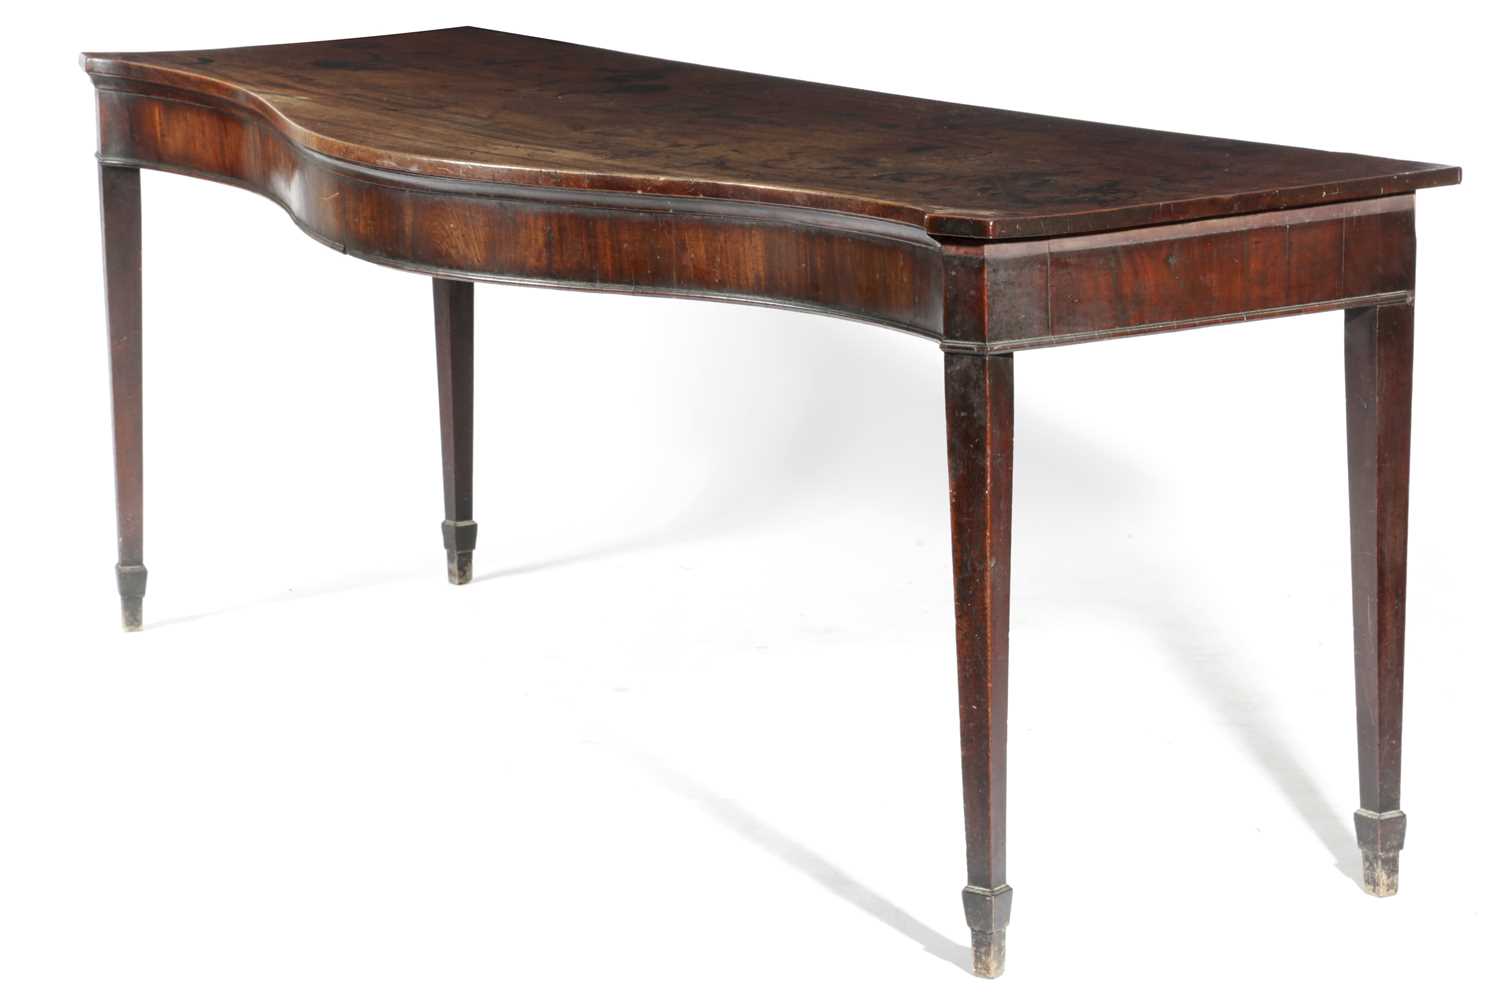 A GEORGE III MAHOGANY SERPENTINE SERVING TABLE CHIPPENDALE PERIOD, C.1770 on square tapering legs